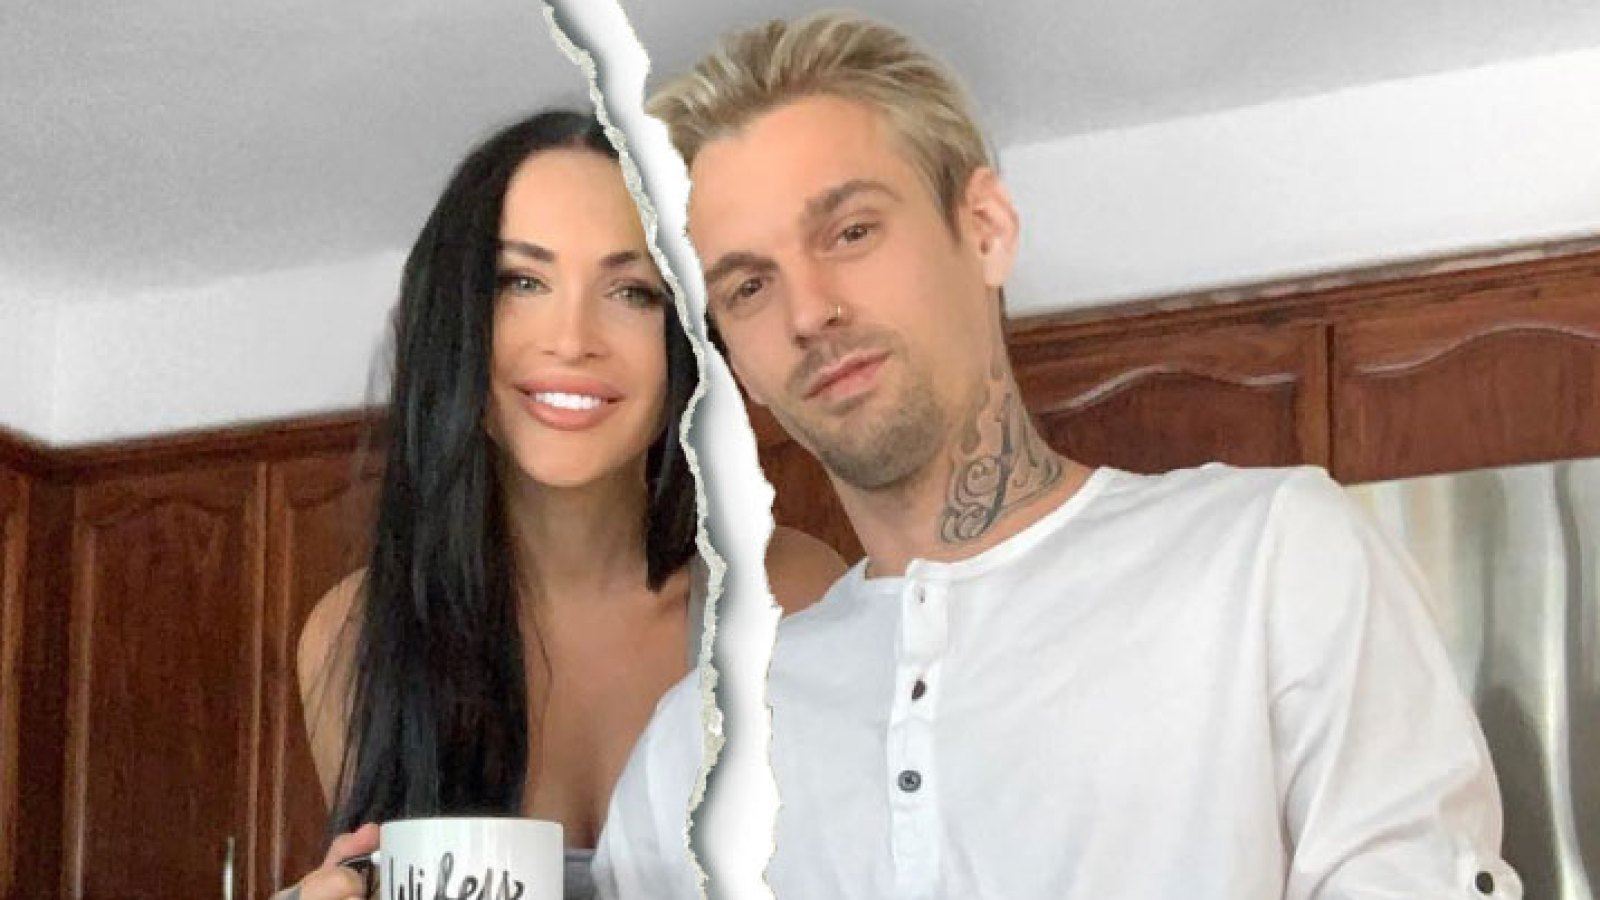 Aaron Carter and Girlfriend Lina Valentina Split After Nearly 1 Year of Dating